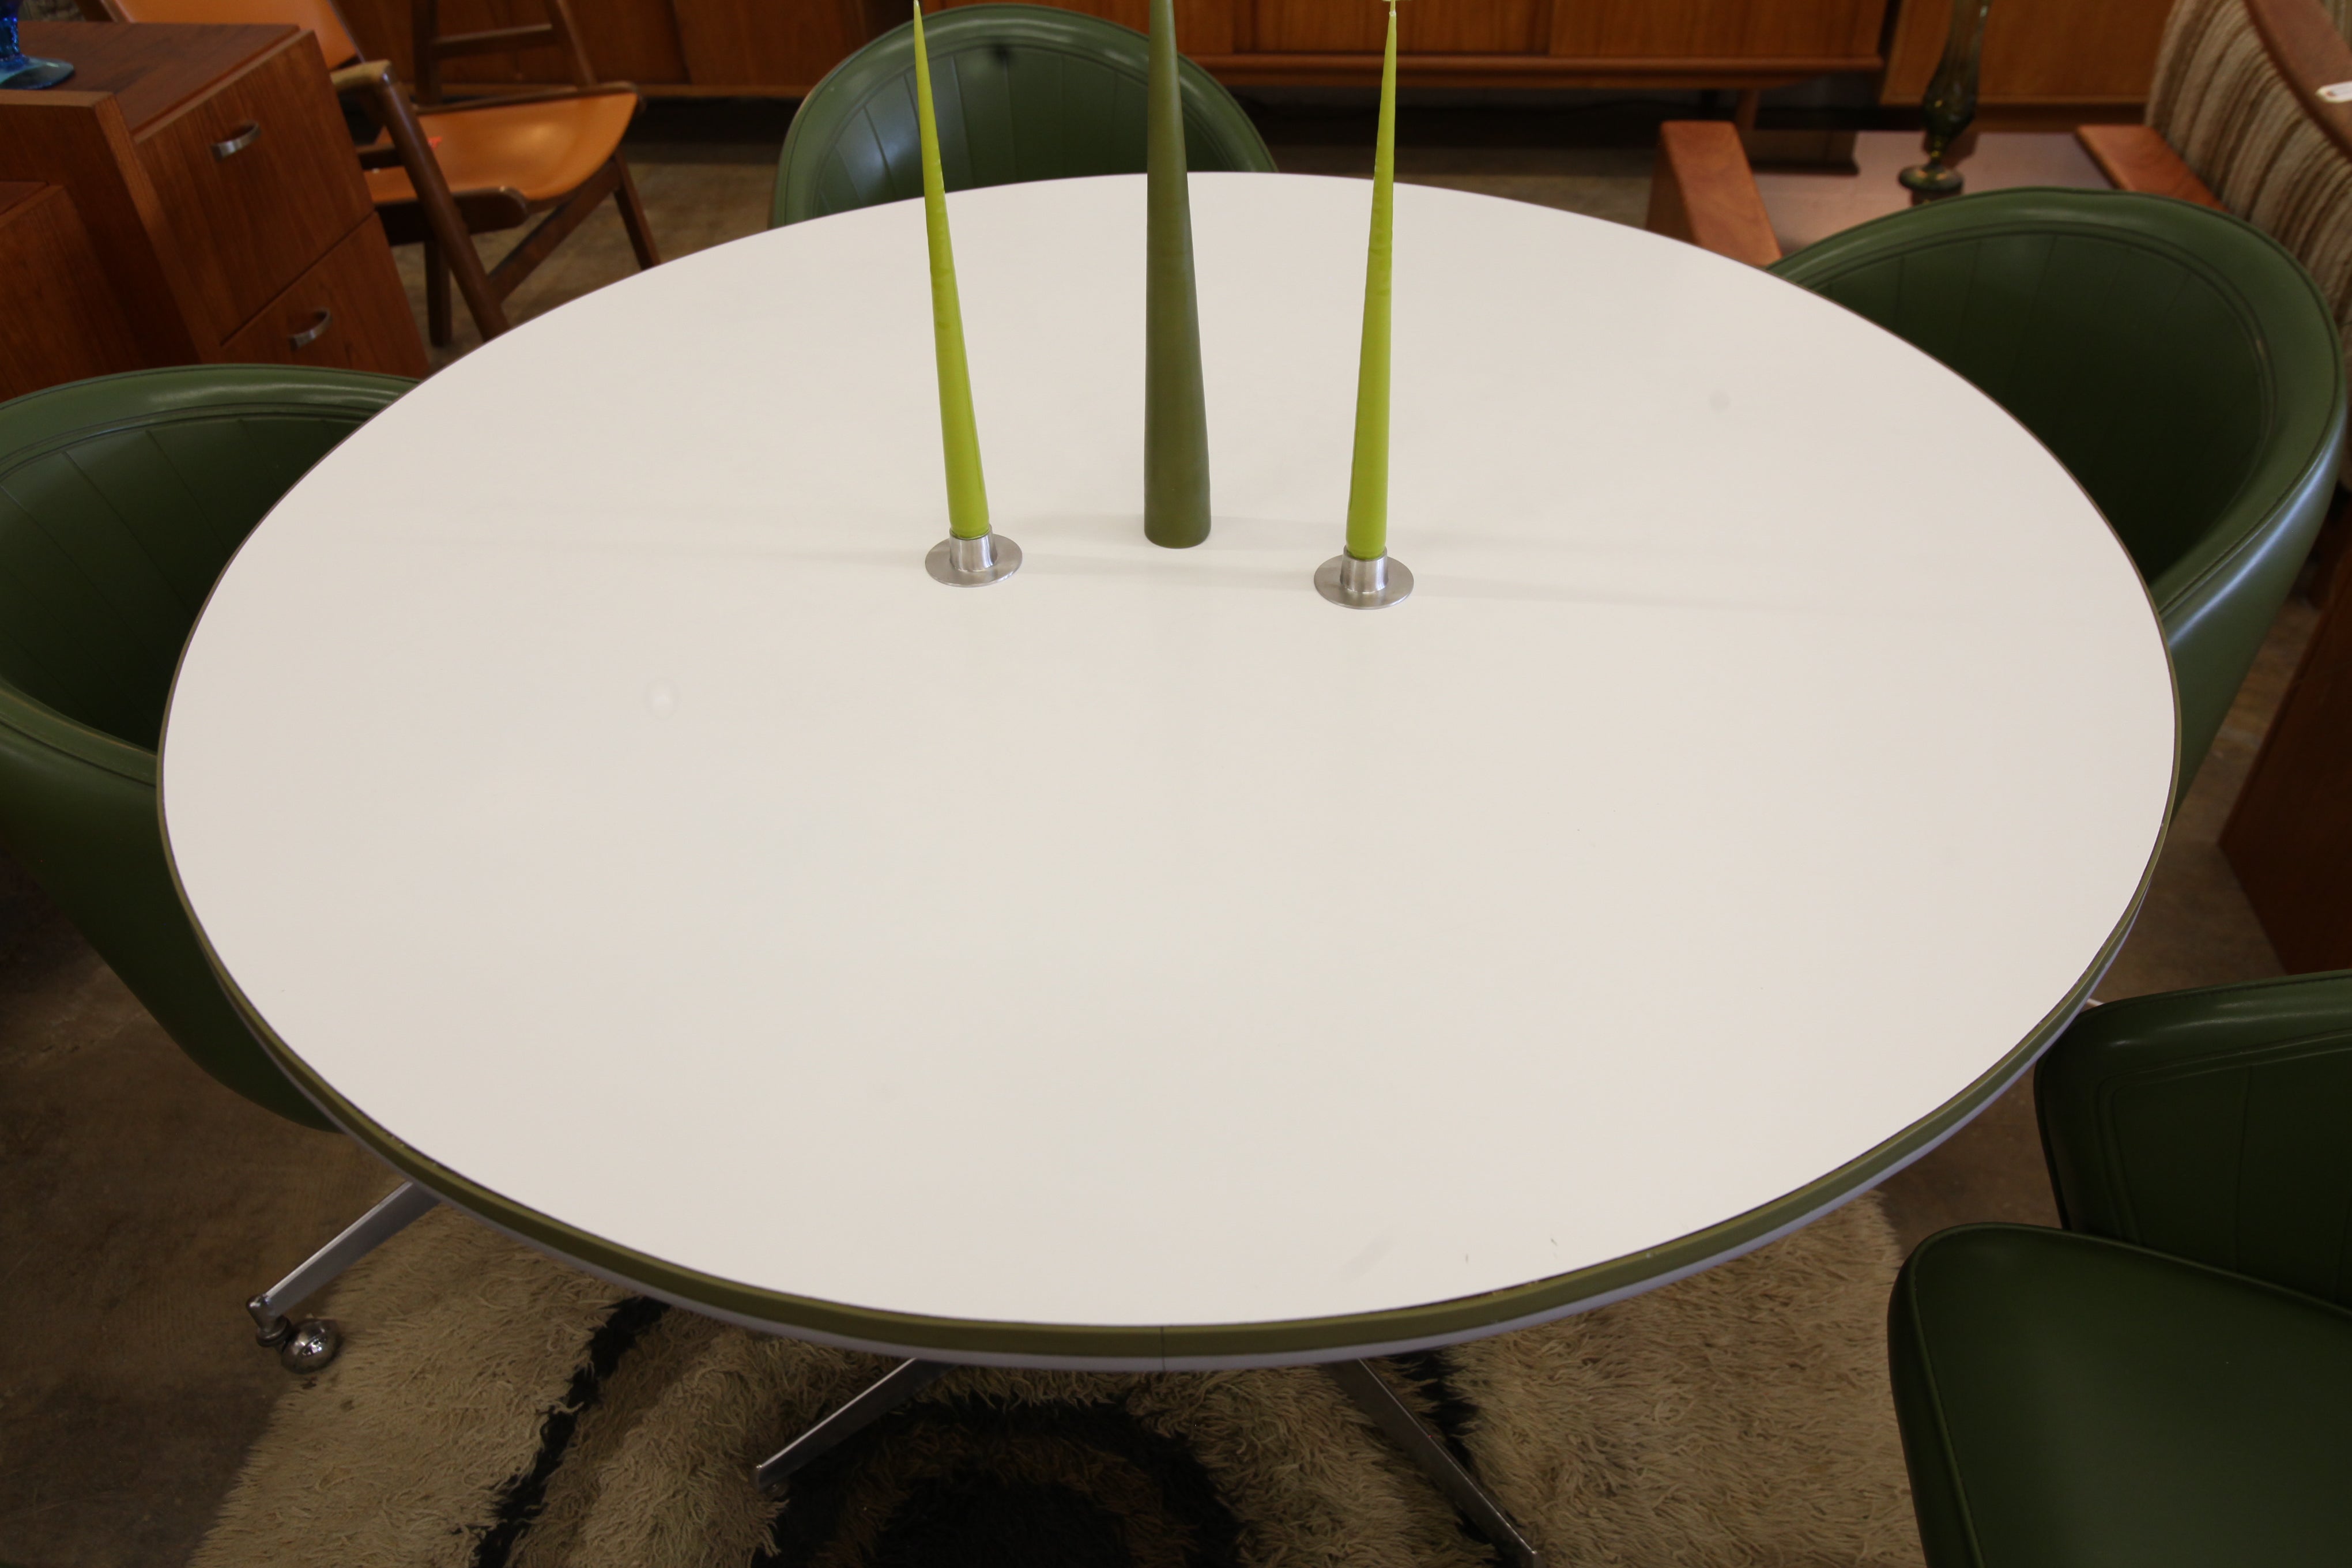 Retro Vintage Round Table and 5 Chairs (47.5"Dia / 29.5"H)